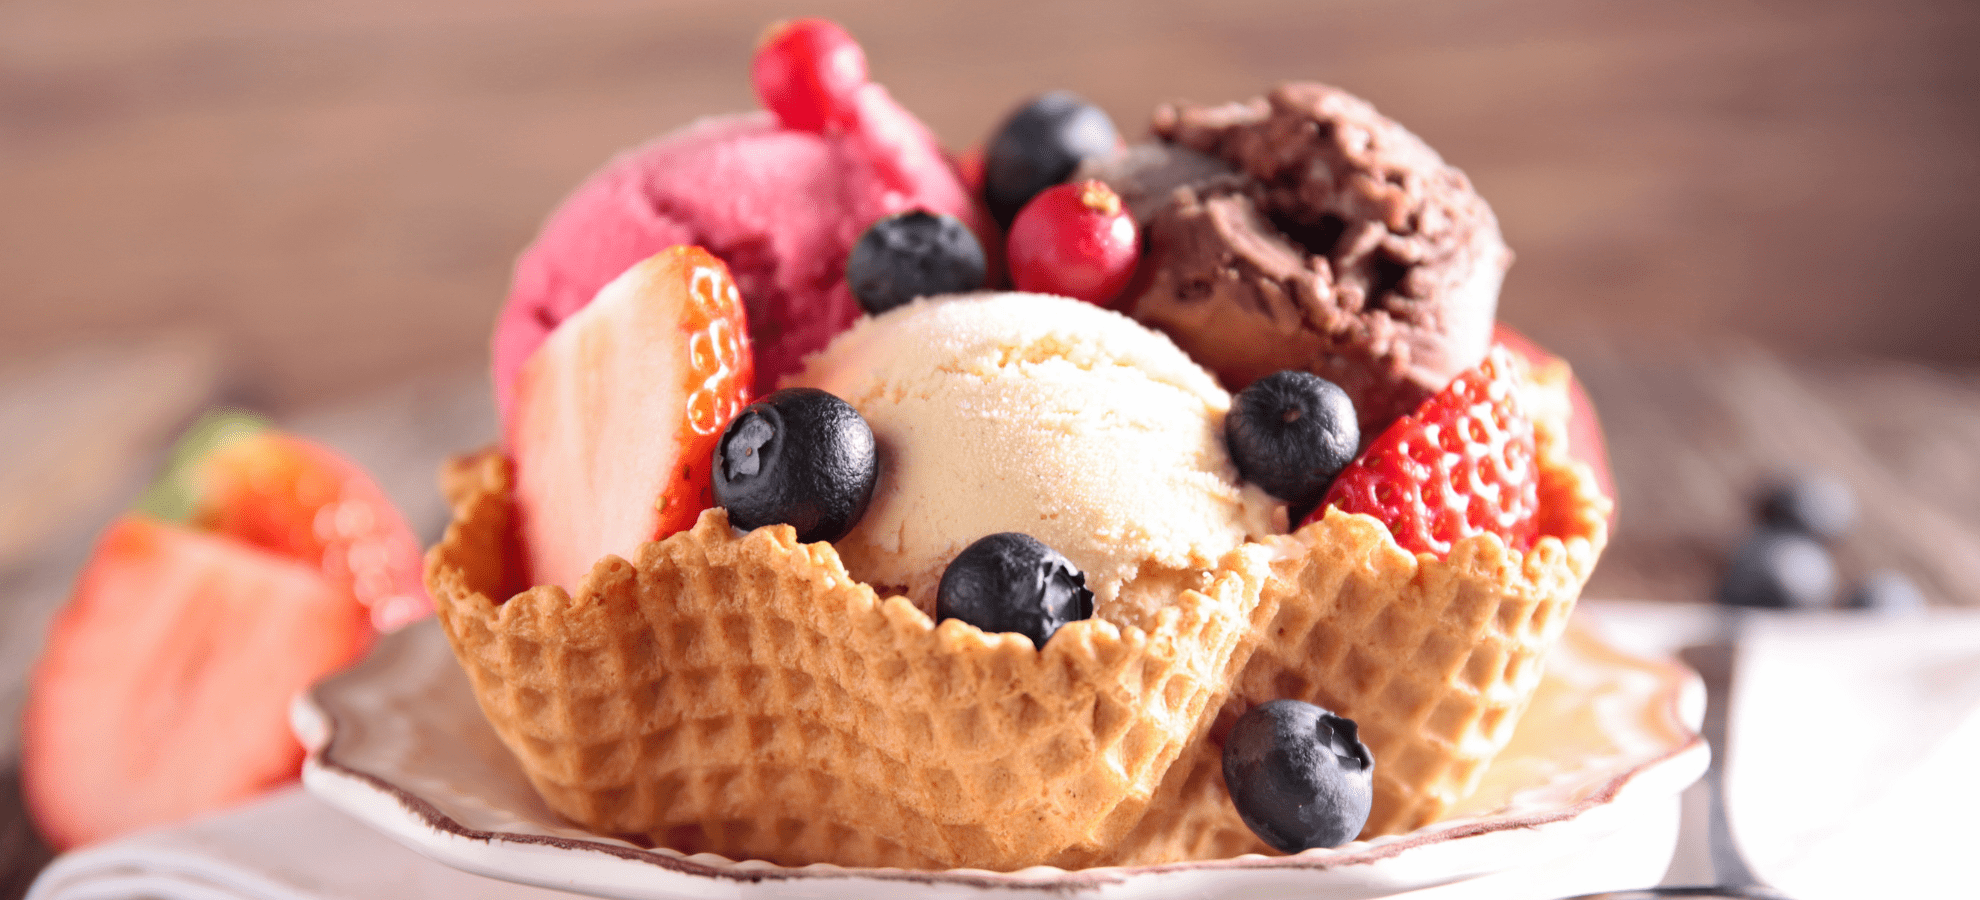 ice cream waffle bowl with straberries, blueberries and vanilla, chocolate and stratebery ice cream.